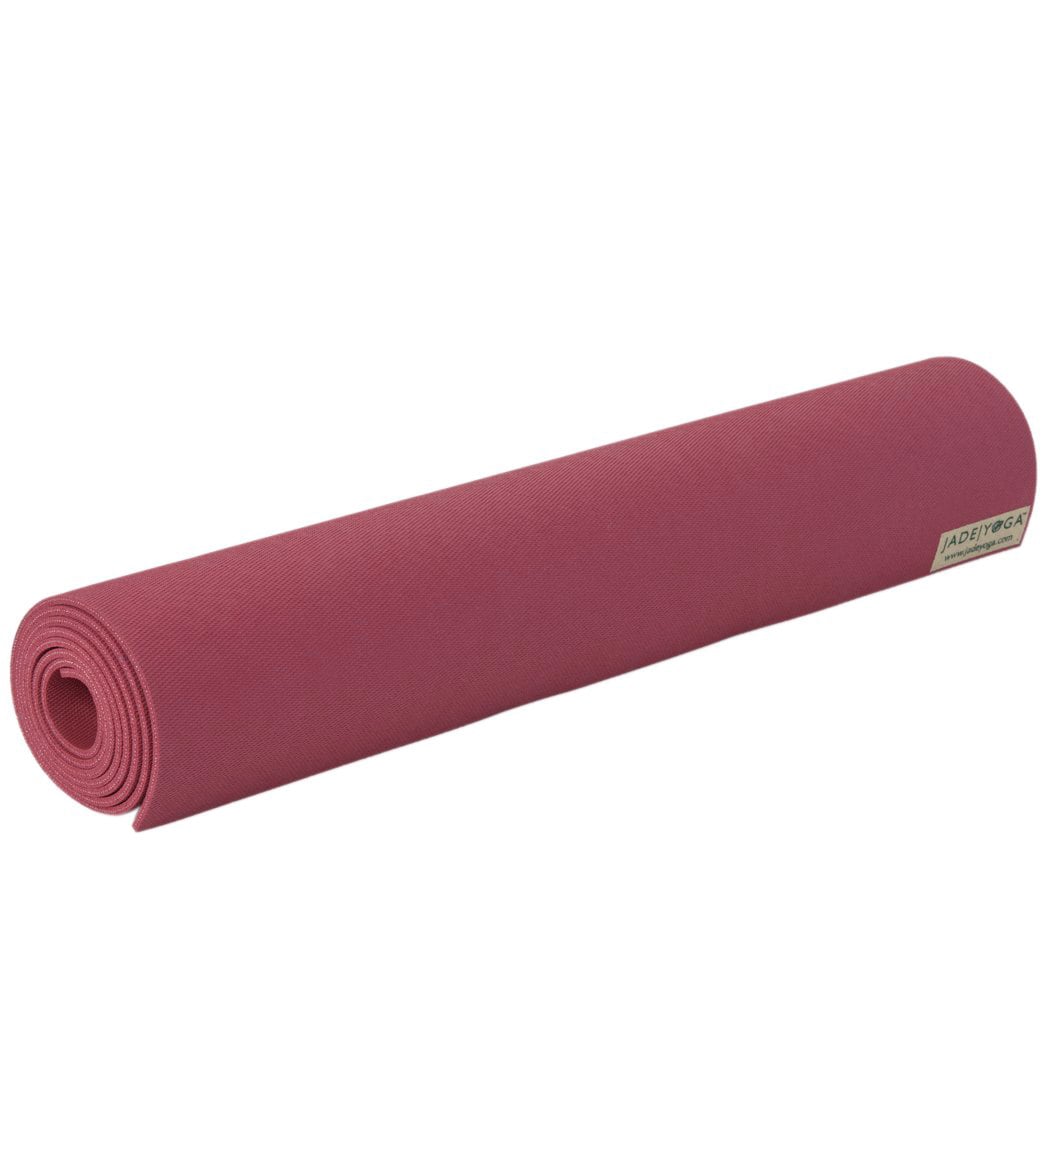 Everyday Yoga Mat 72 Inch 5mm at YogaOutlet.com –